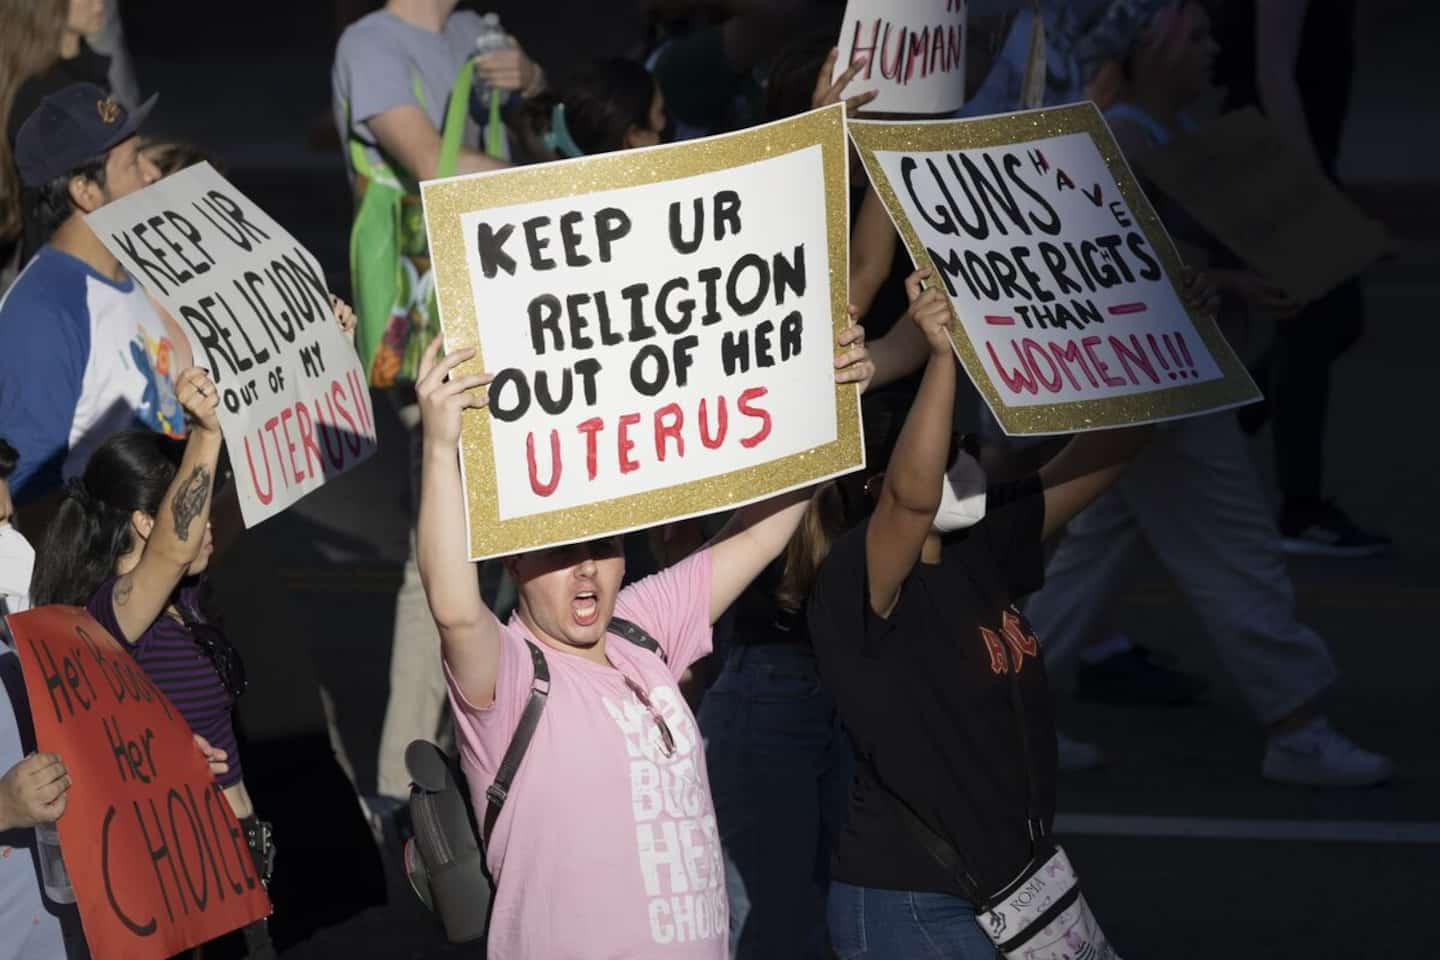 From New York to California, a promise of “sanctuaries” for abortion